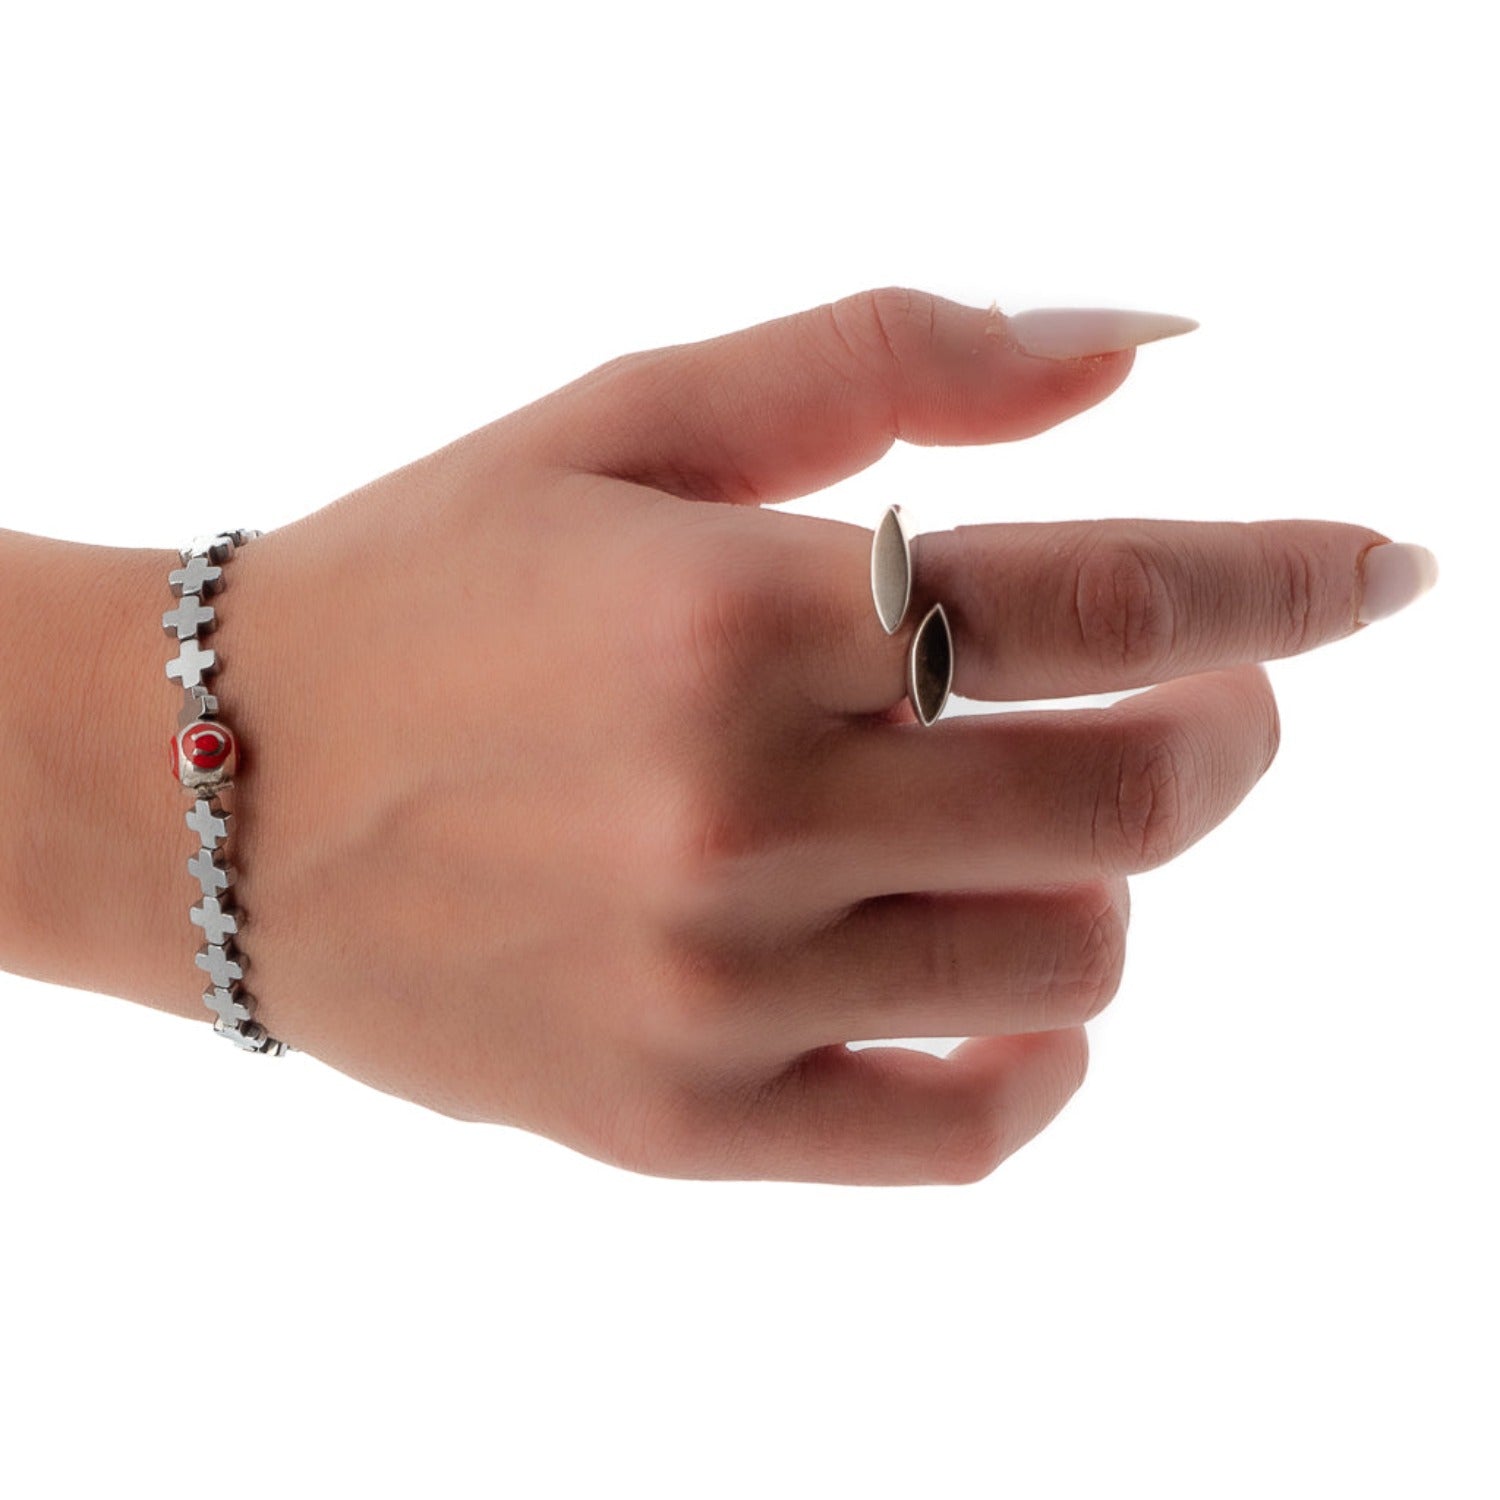 The model wearing the Silver Color Lucky Charms Bracelet, showcasing its elegant design and meaningful charms.